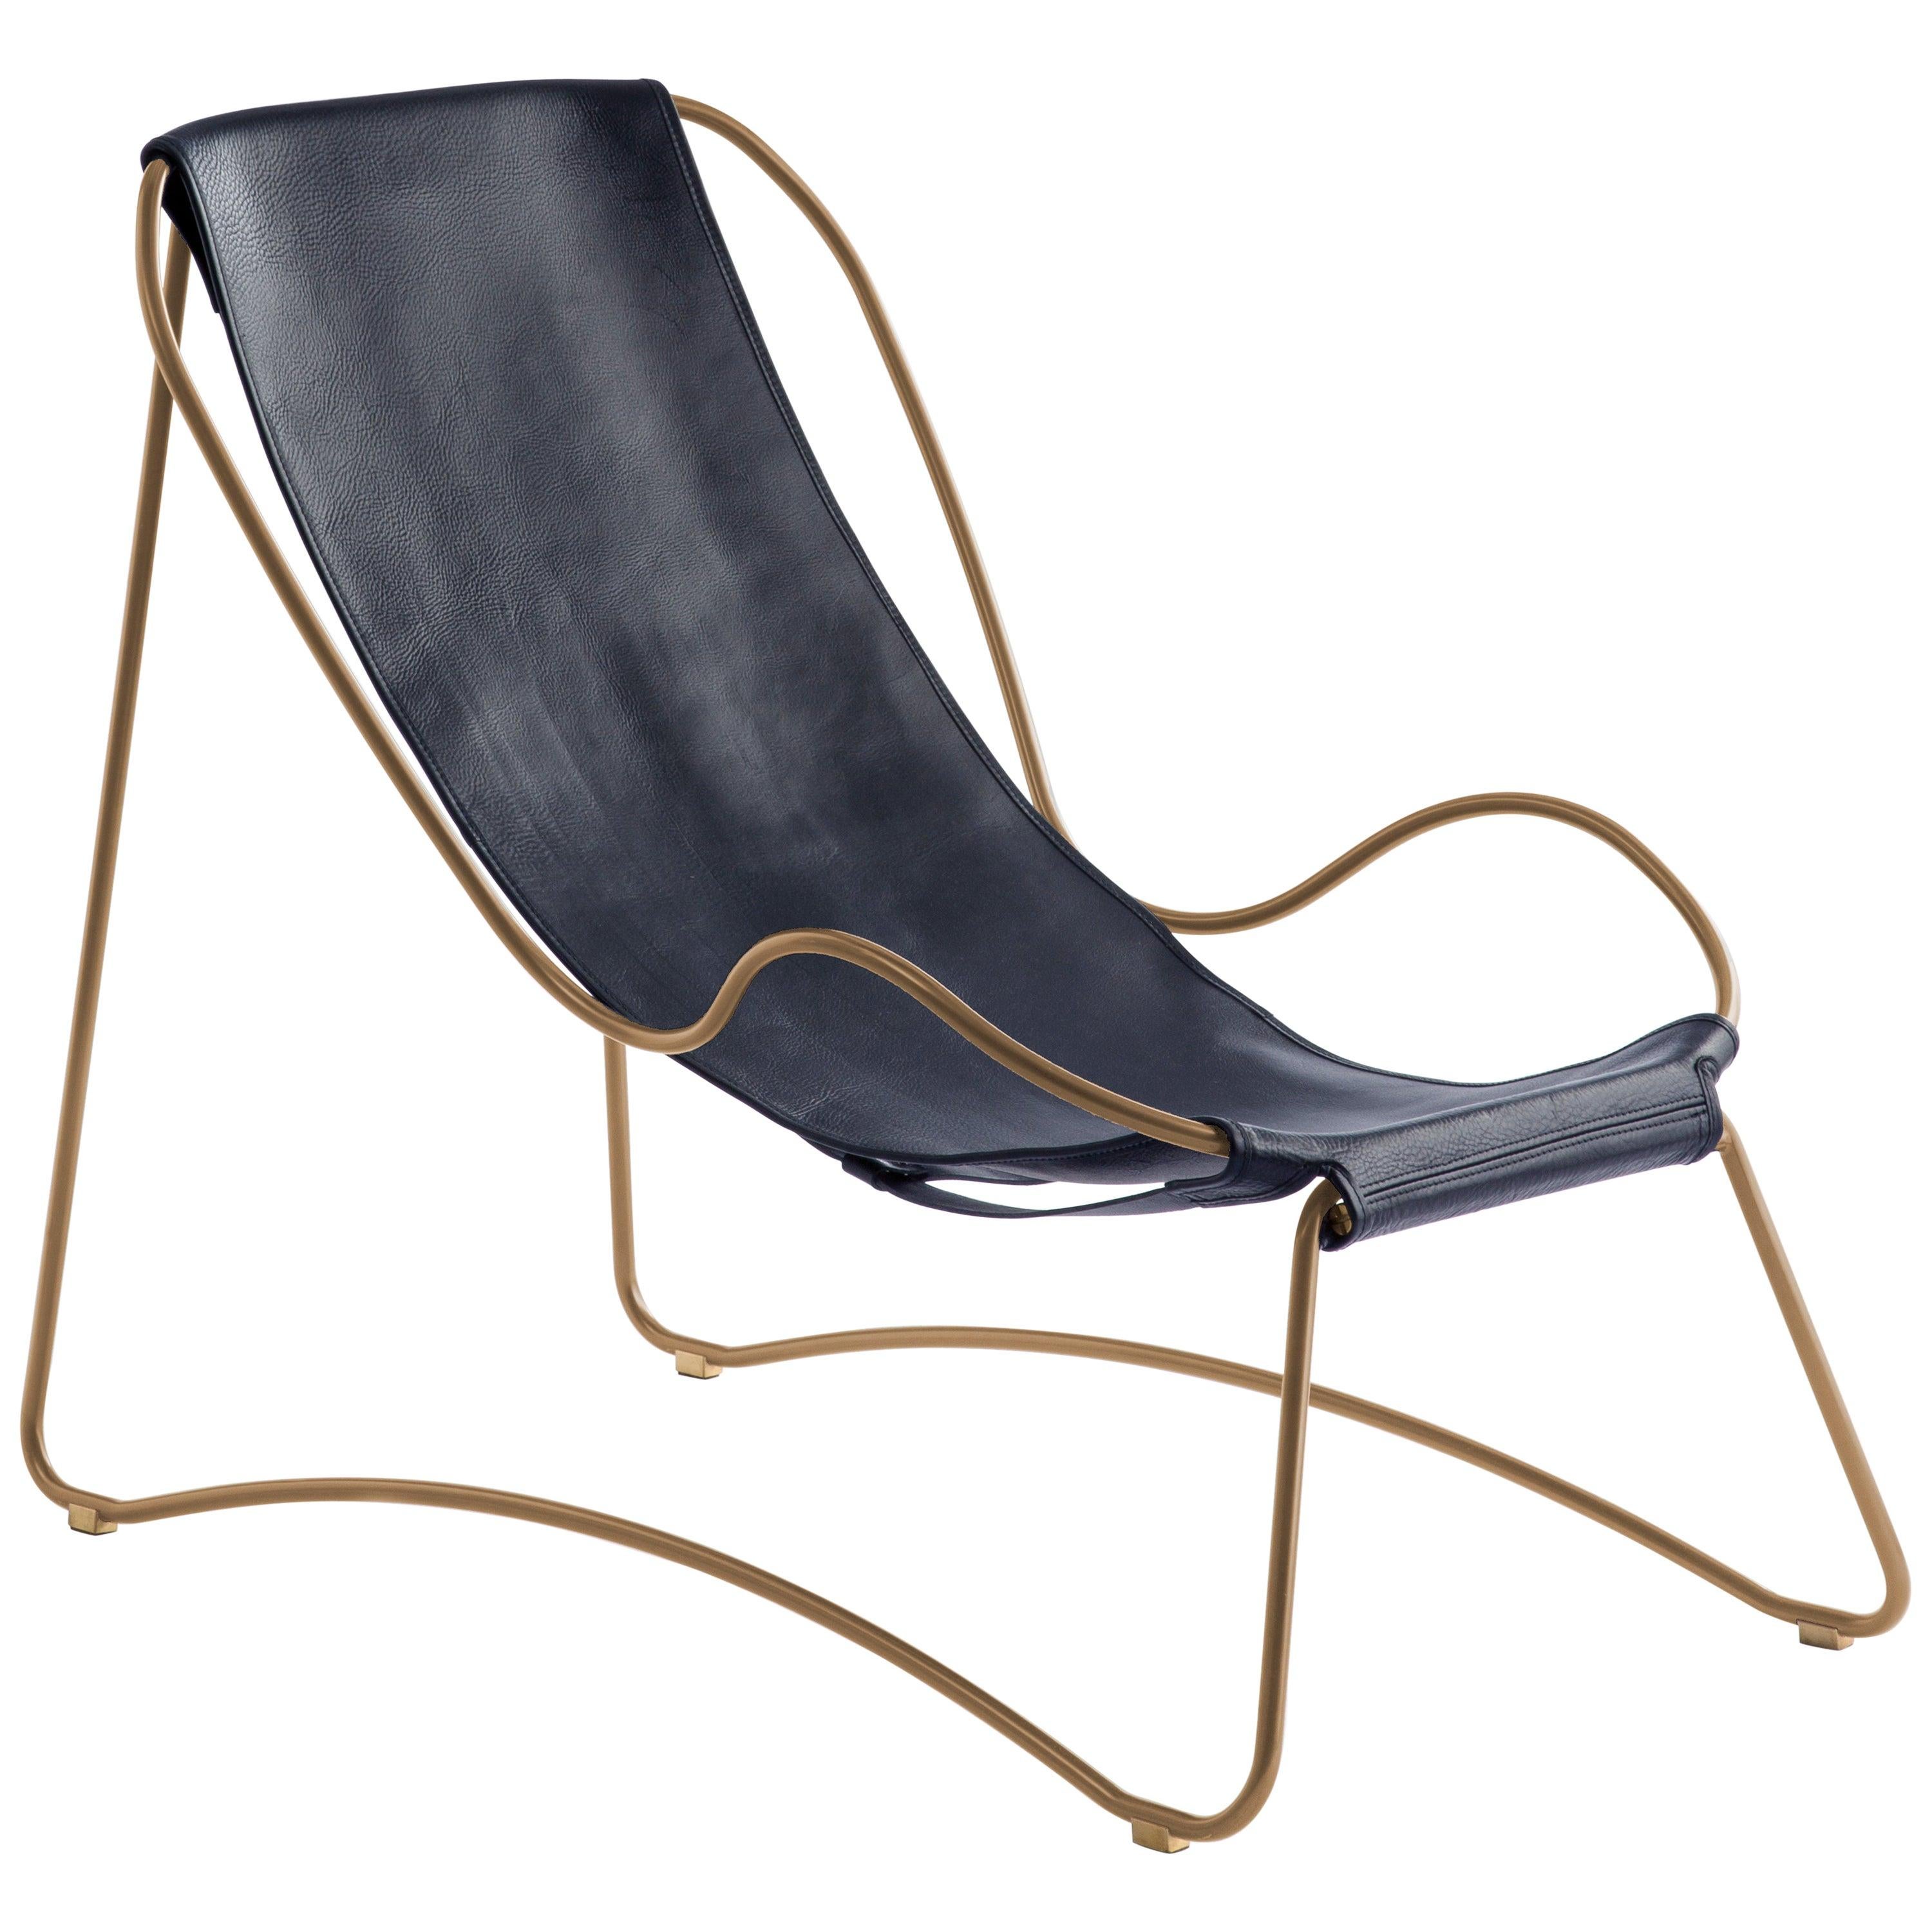 Sculptural Contemporary Chaise Lounge Aged Brass Metal, Navy Blue Leather Sample For Sale